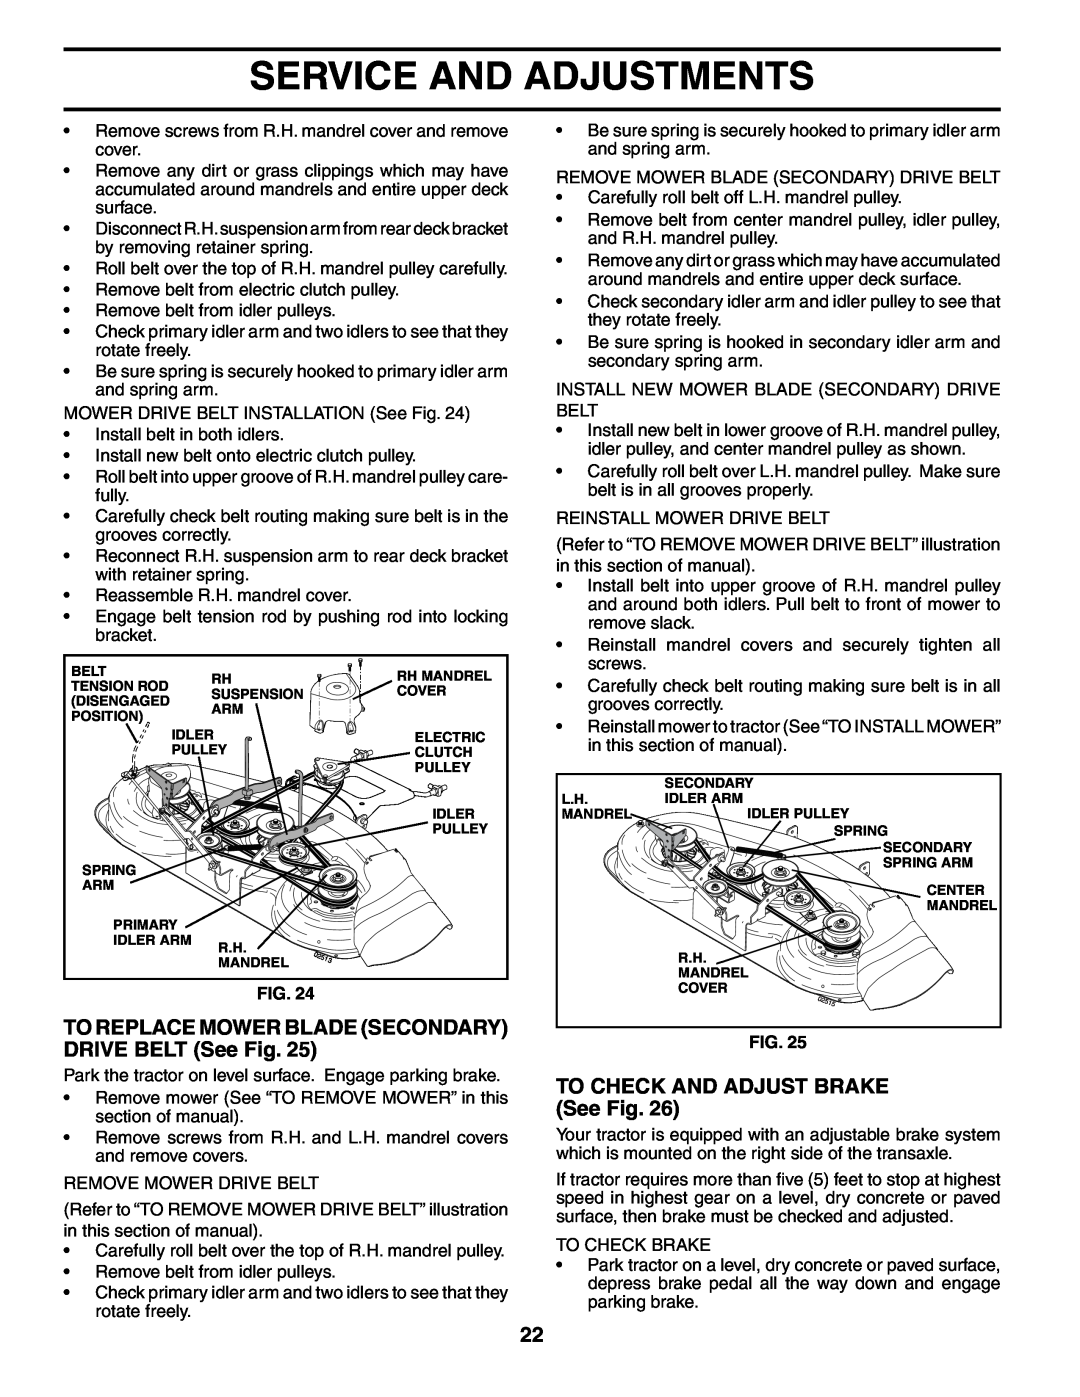 Poulan PD20PH48STA owner manual TO REPLACE MOWER BLADE SECONDARY DRIVE BELT See Fig, TO CHECK AND ADJUST BRAKE See Fig 